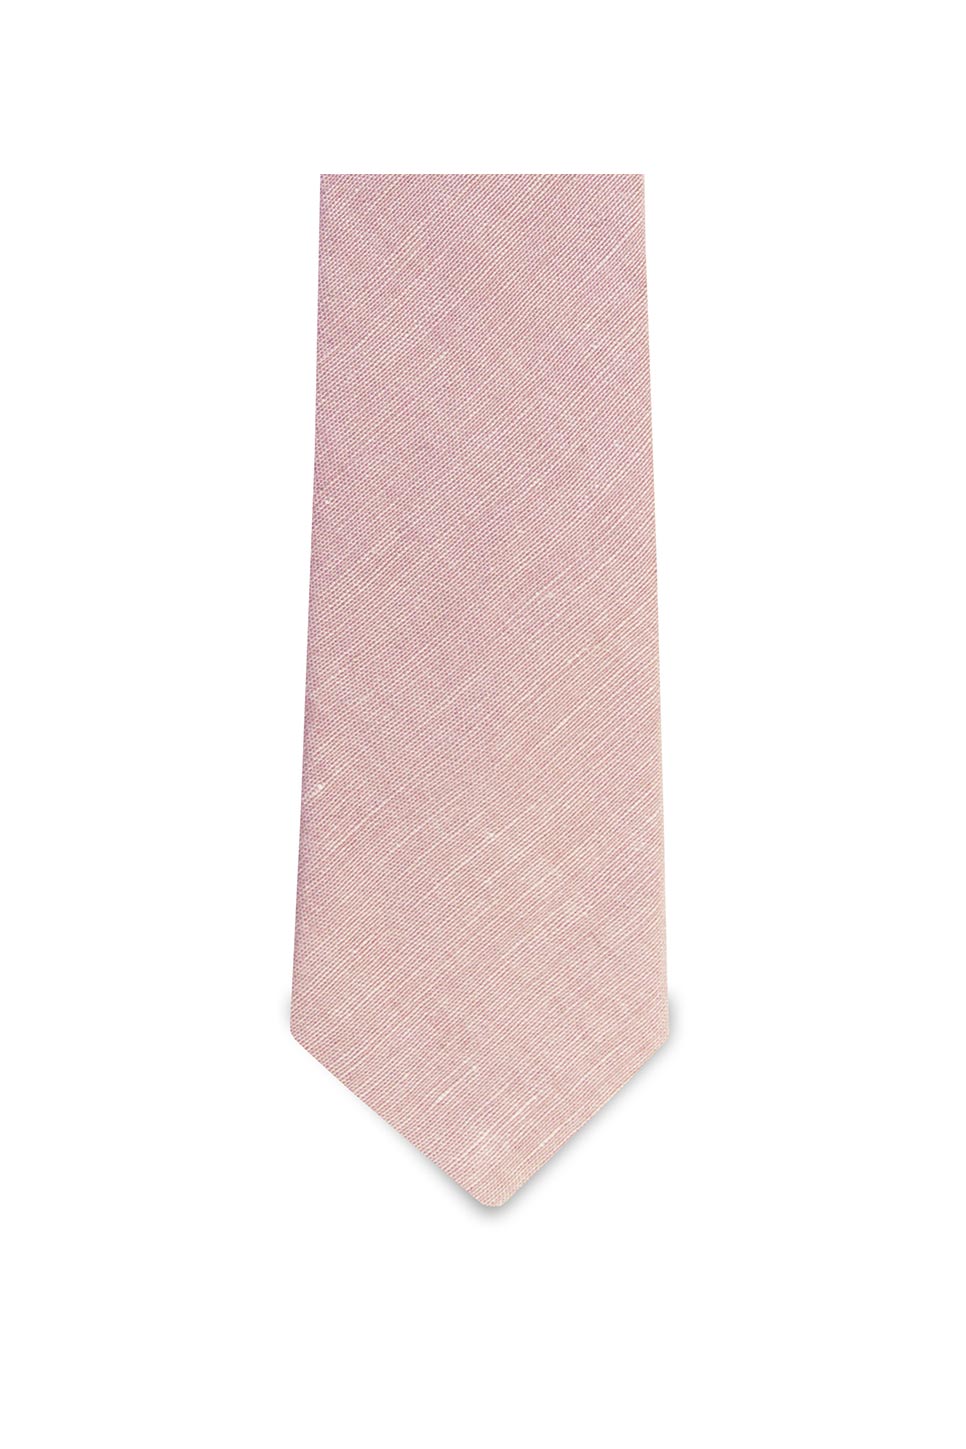 Pocket Square Clothing - The Liam Linen Tie